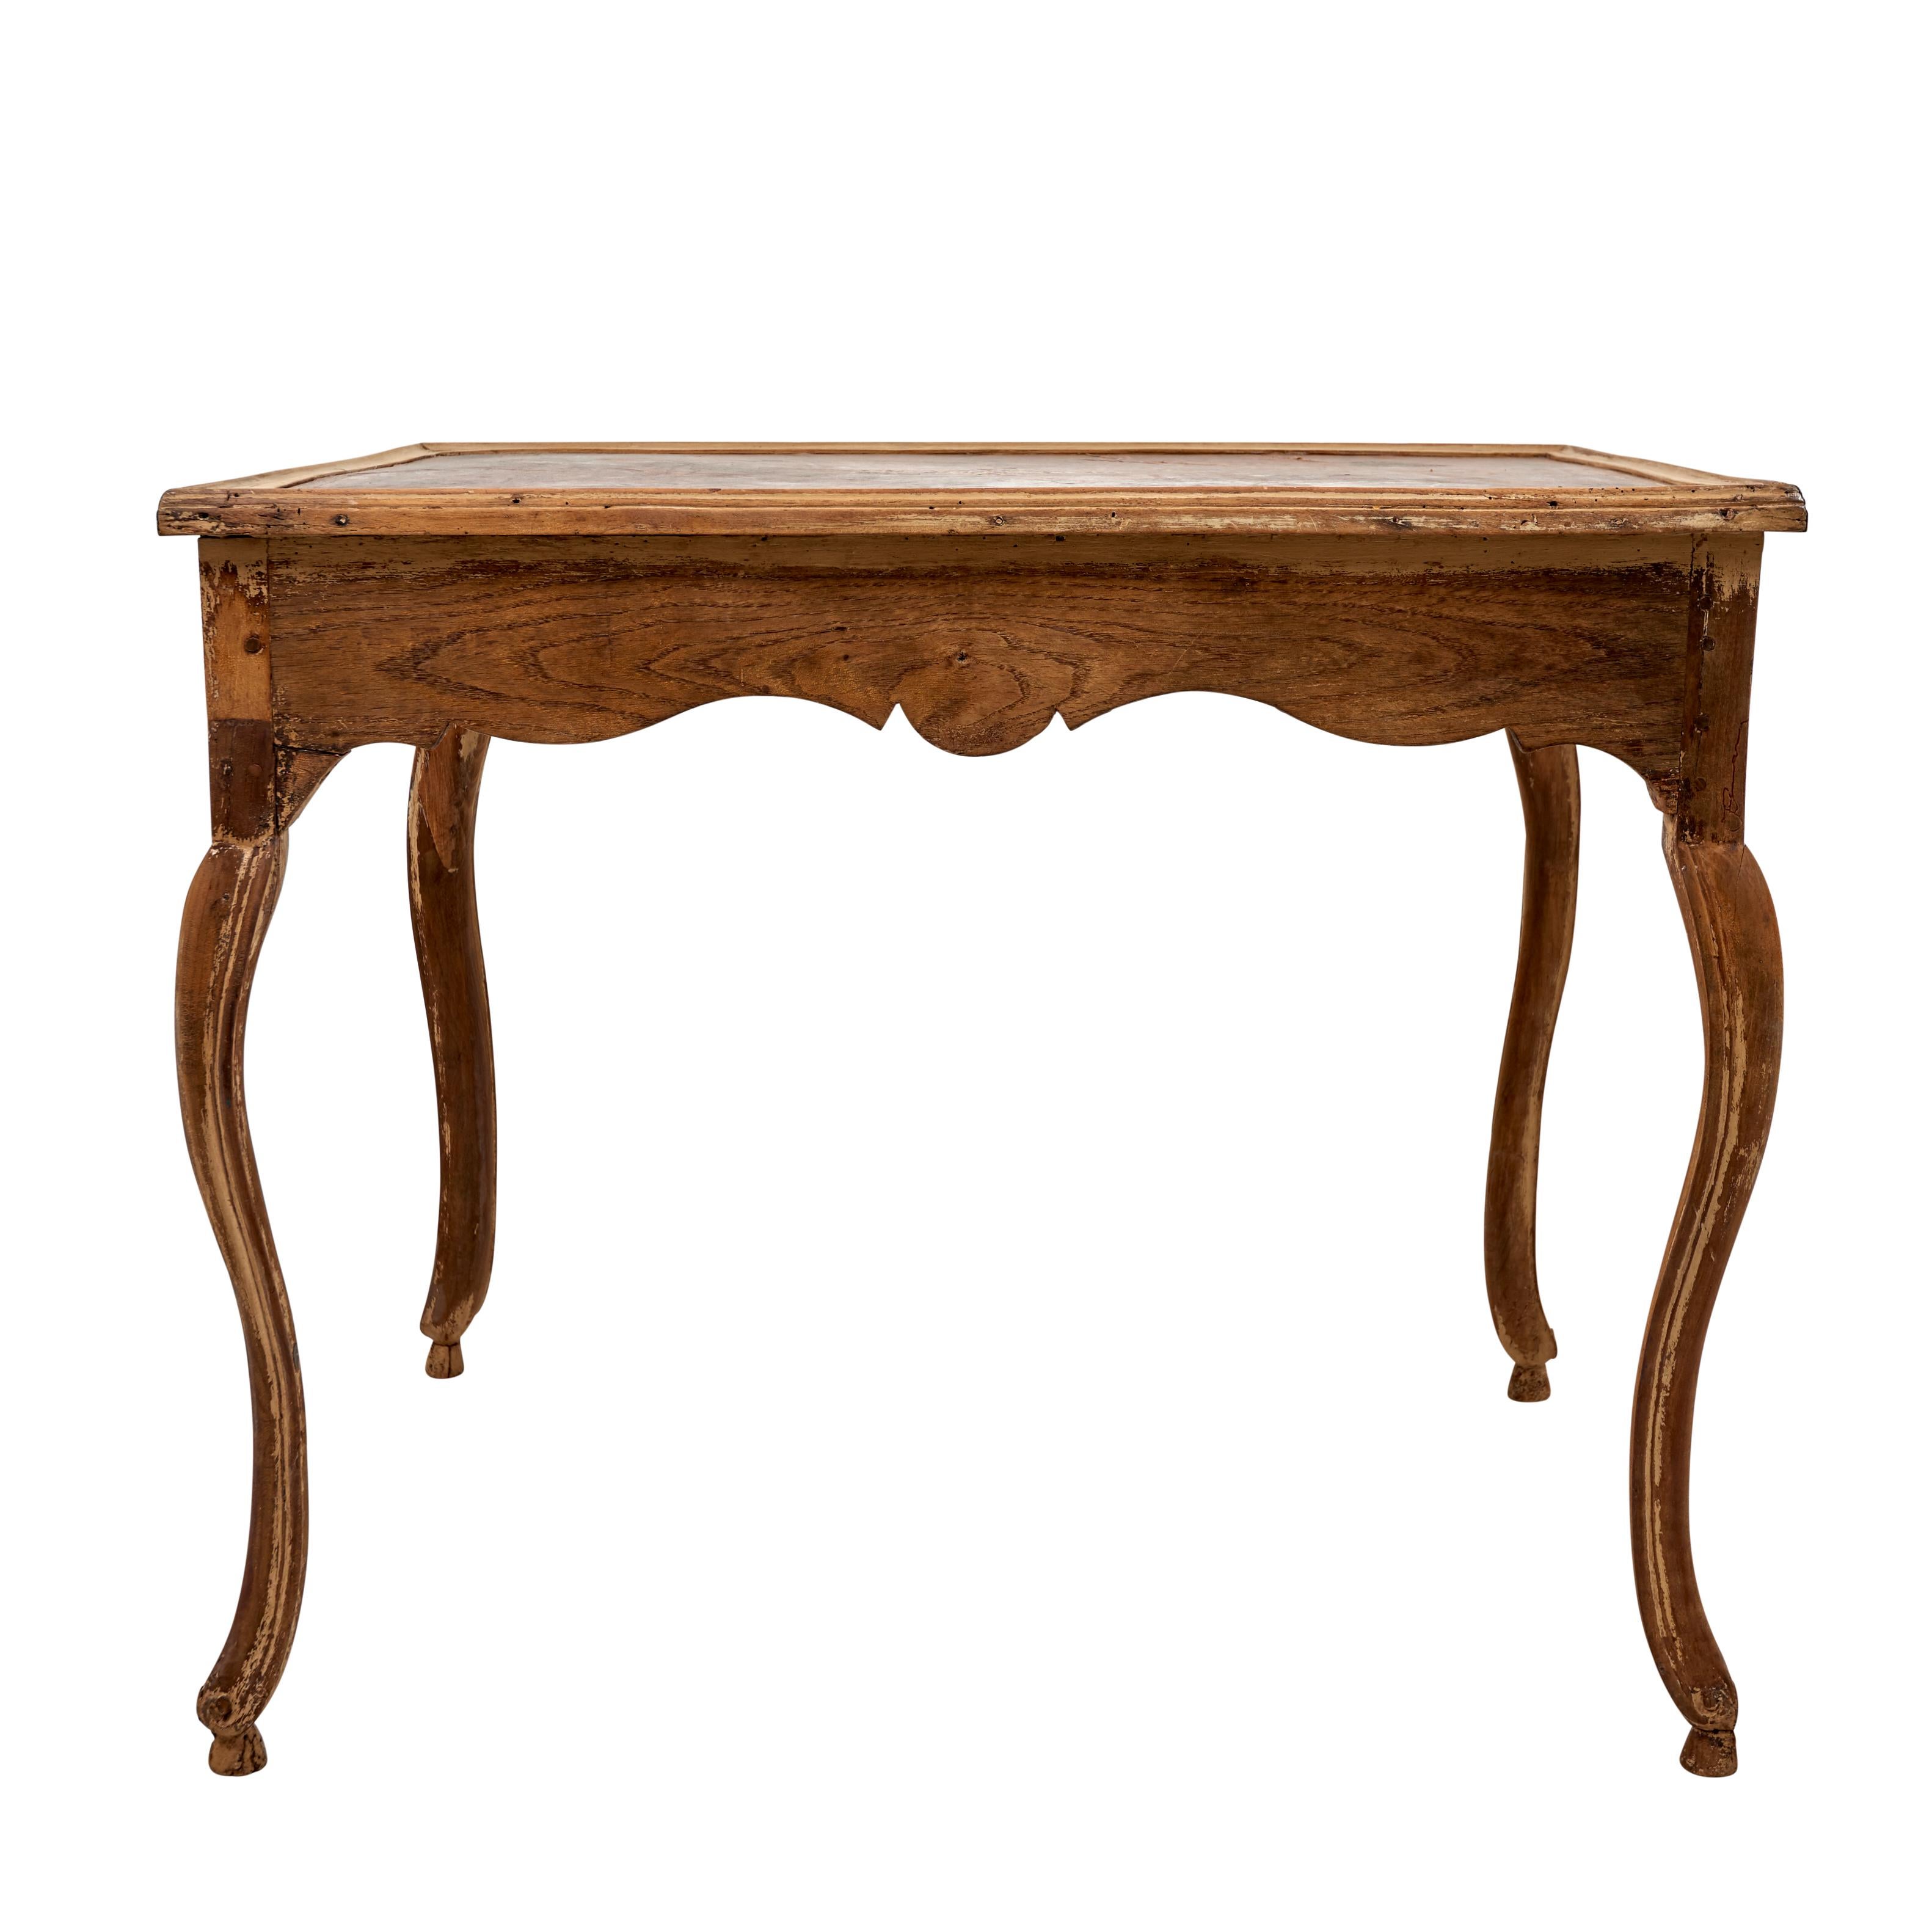 This Early 19th century French table includes an original tooled leather top and two drawers.

Since Schumacher was founded in 1889, our family-owned company has been synonymous with style, taste, and innovation. A passion for luxury and an